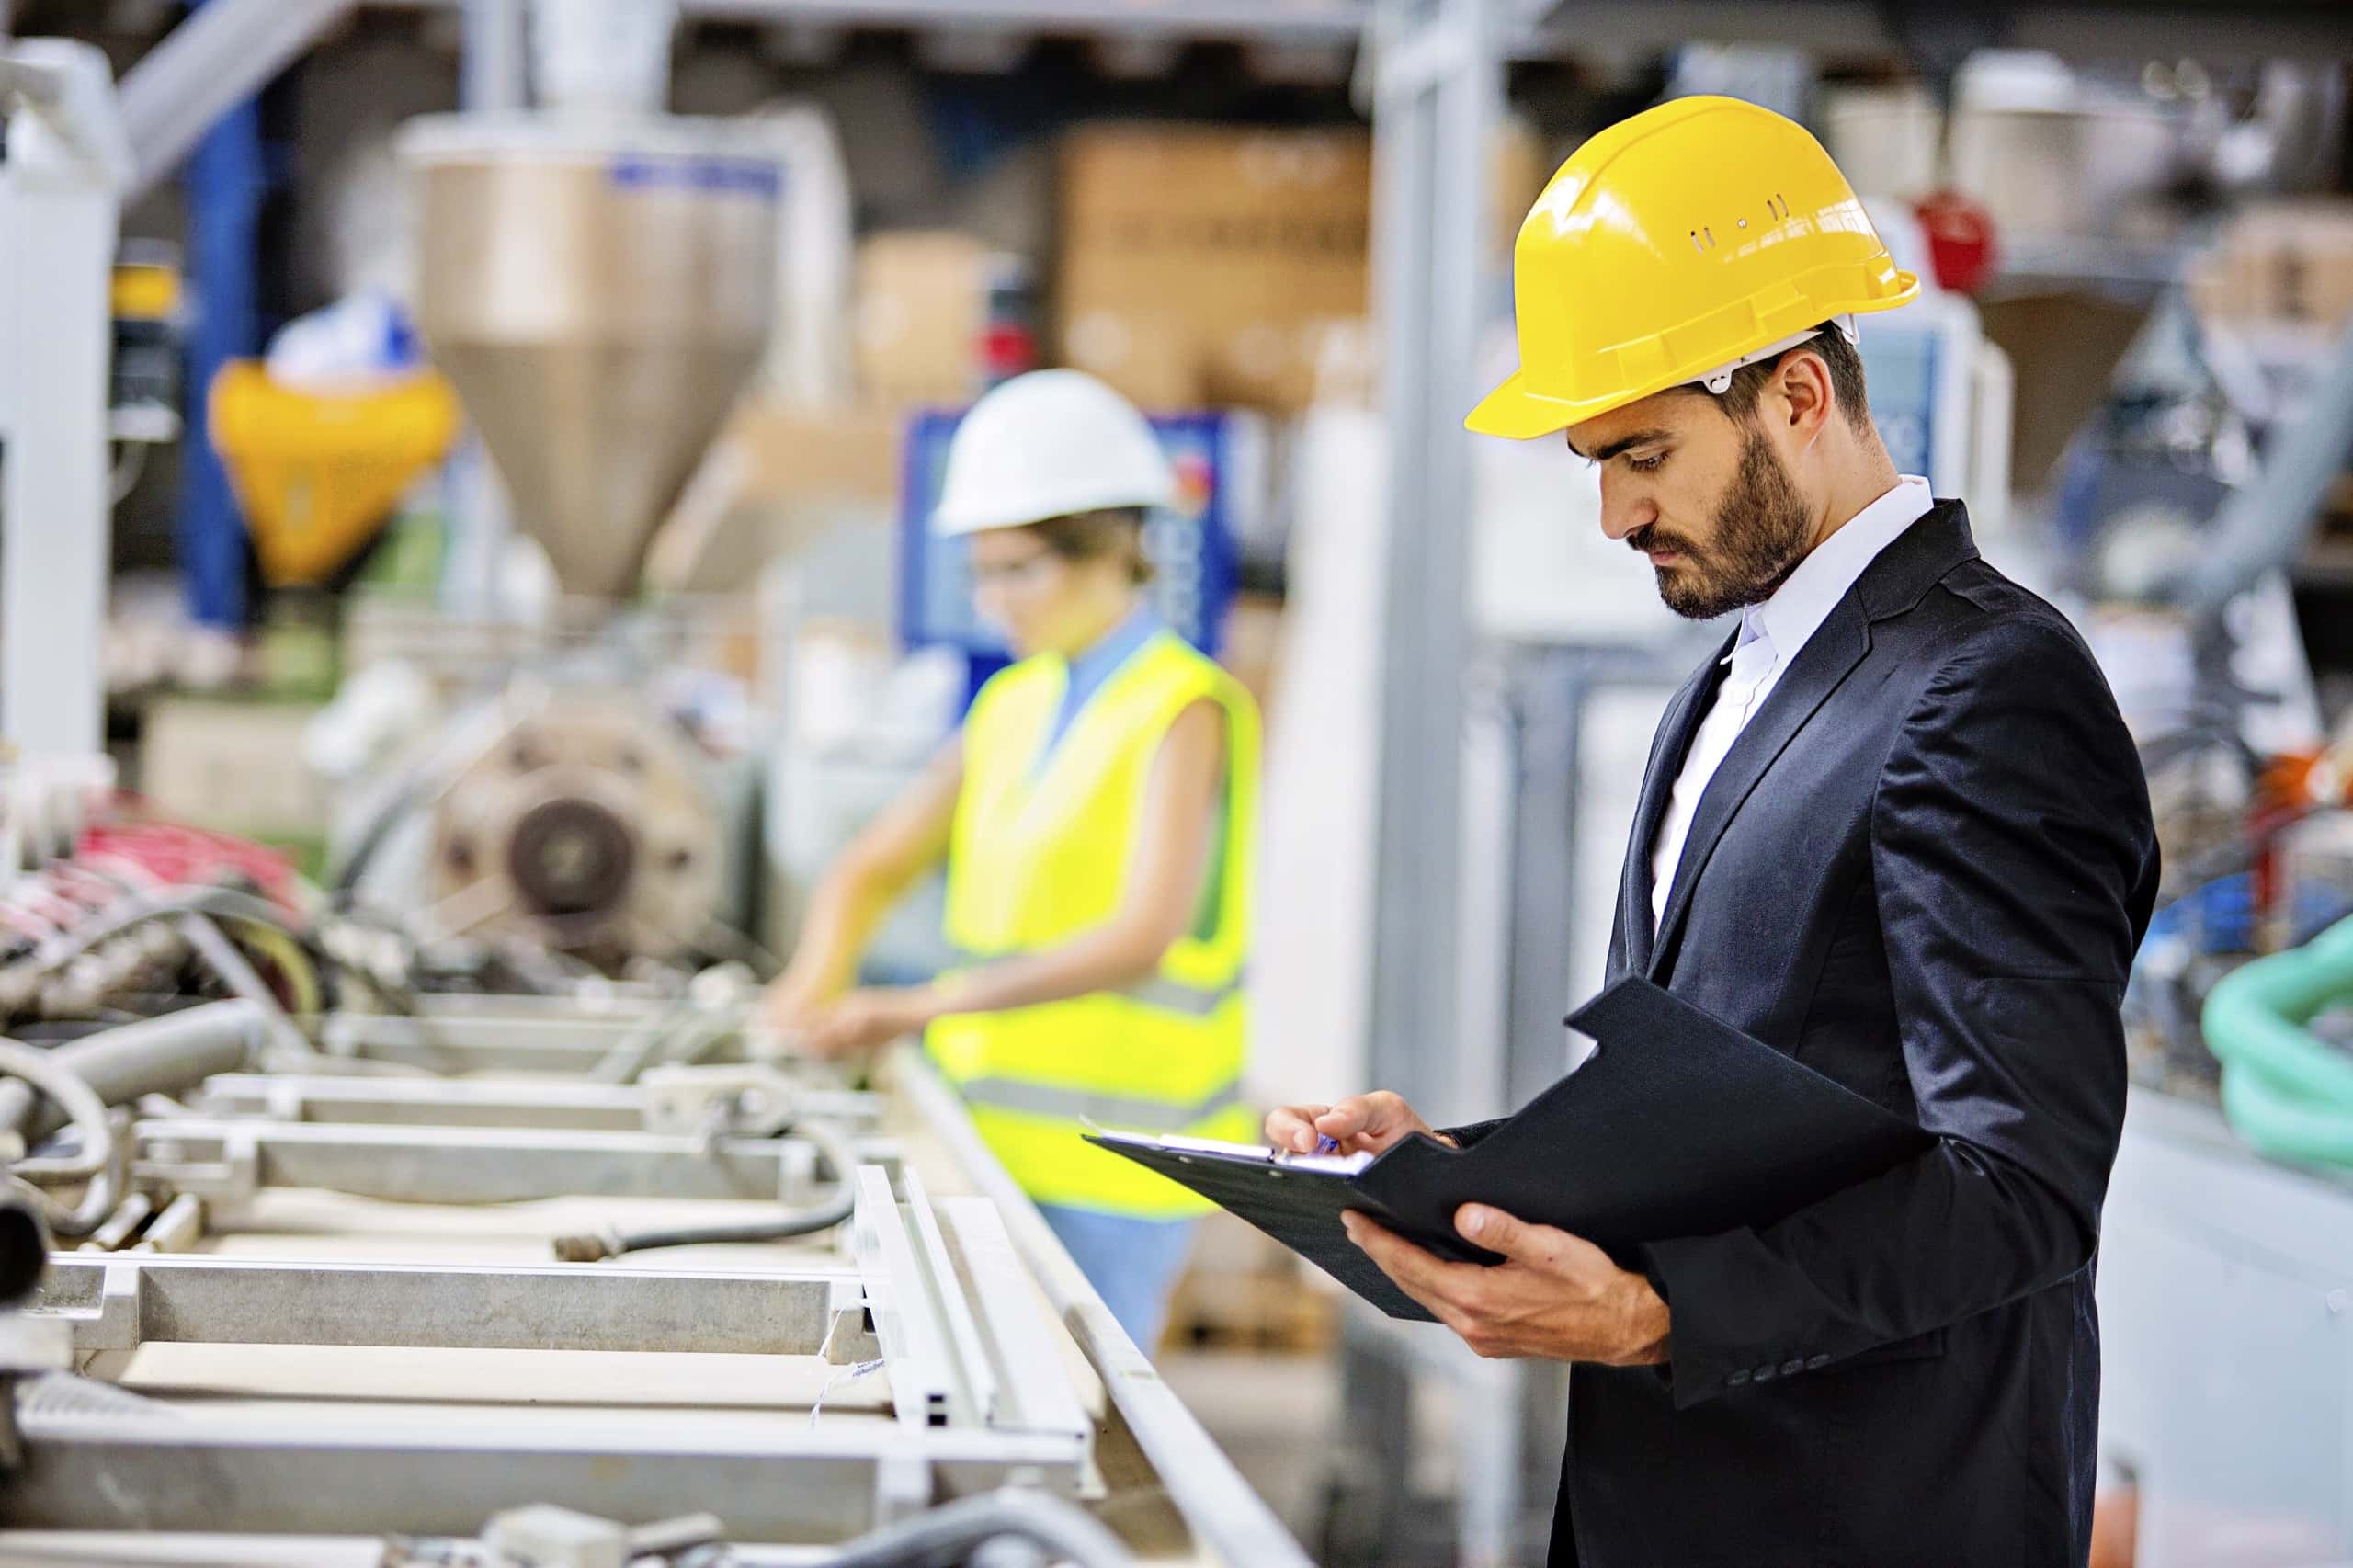 A manufacturing professional wearing a hard hat and safety glasses reviews a clipboard in front of an industrial machine, symbolizing the focus on production and innovation enabled by Fast Fixx''s reliable IT solutions.